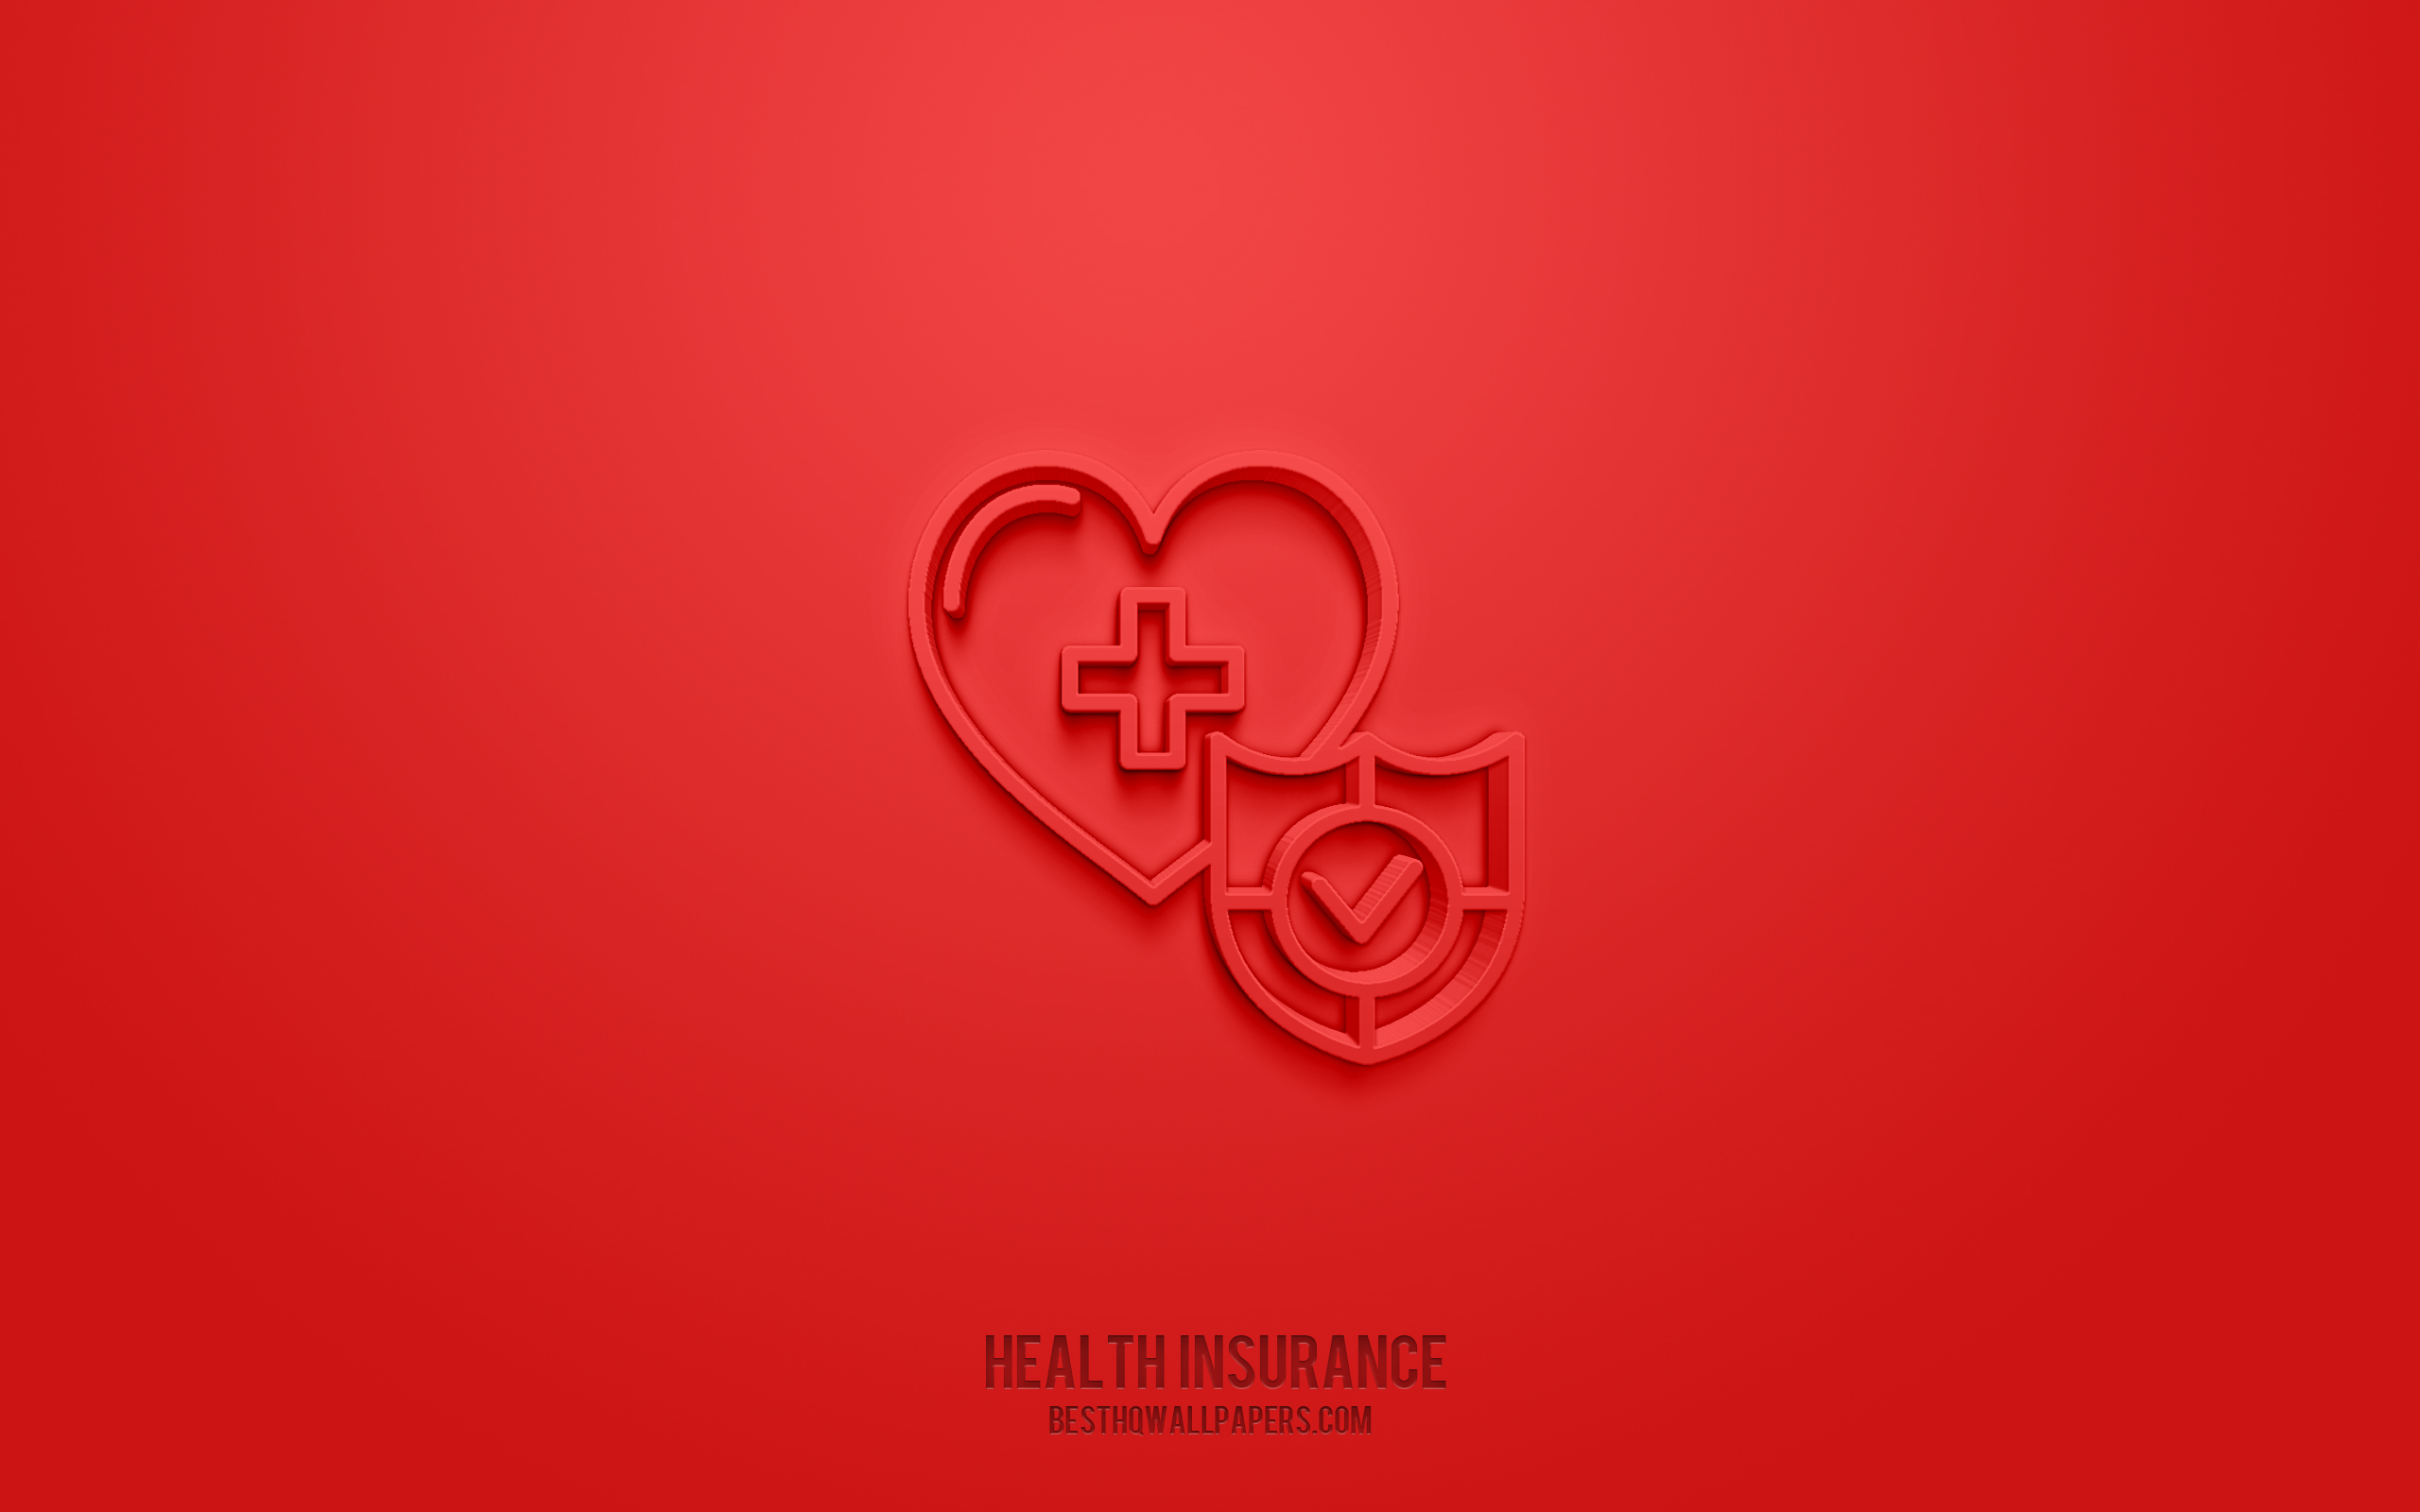 Download wallpaper Health insurance 3D icon, red background, 3D symbols, Health insurance, Insurance icons, 3D icons, Health insurance sign, Insurance 3D icons for desktop with resolution 2560x1600. High Quality HD picture wallpaper